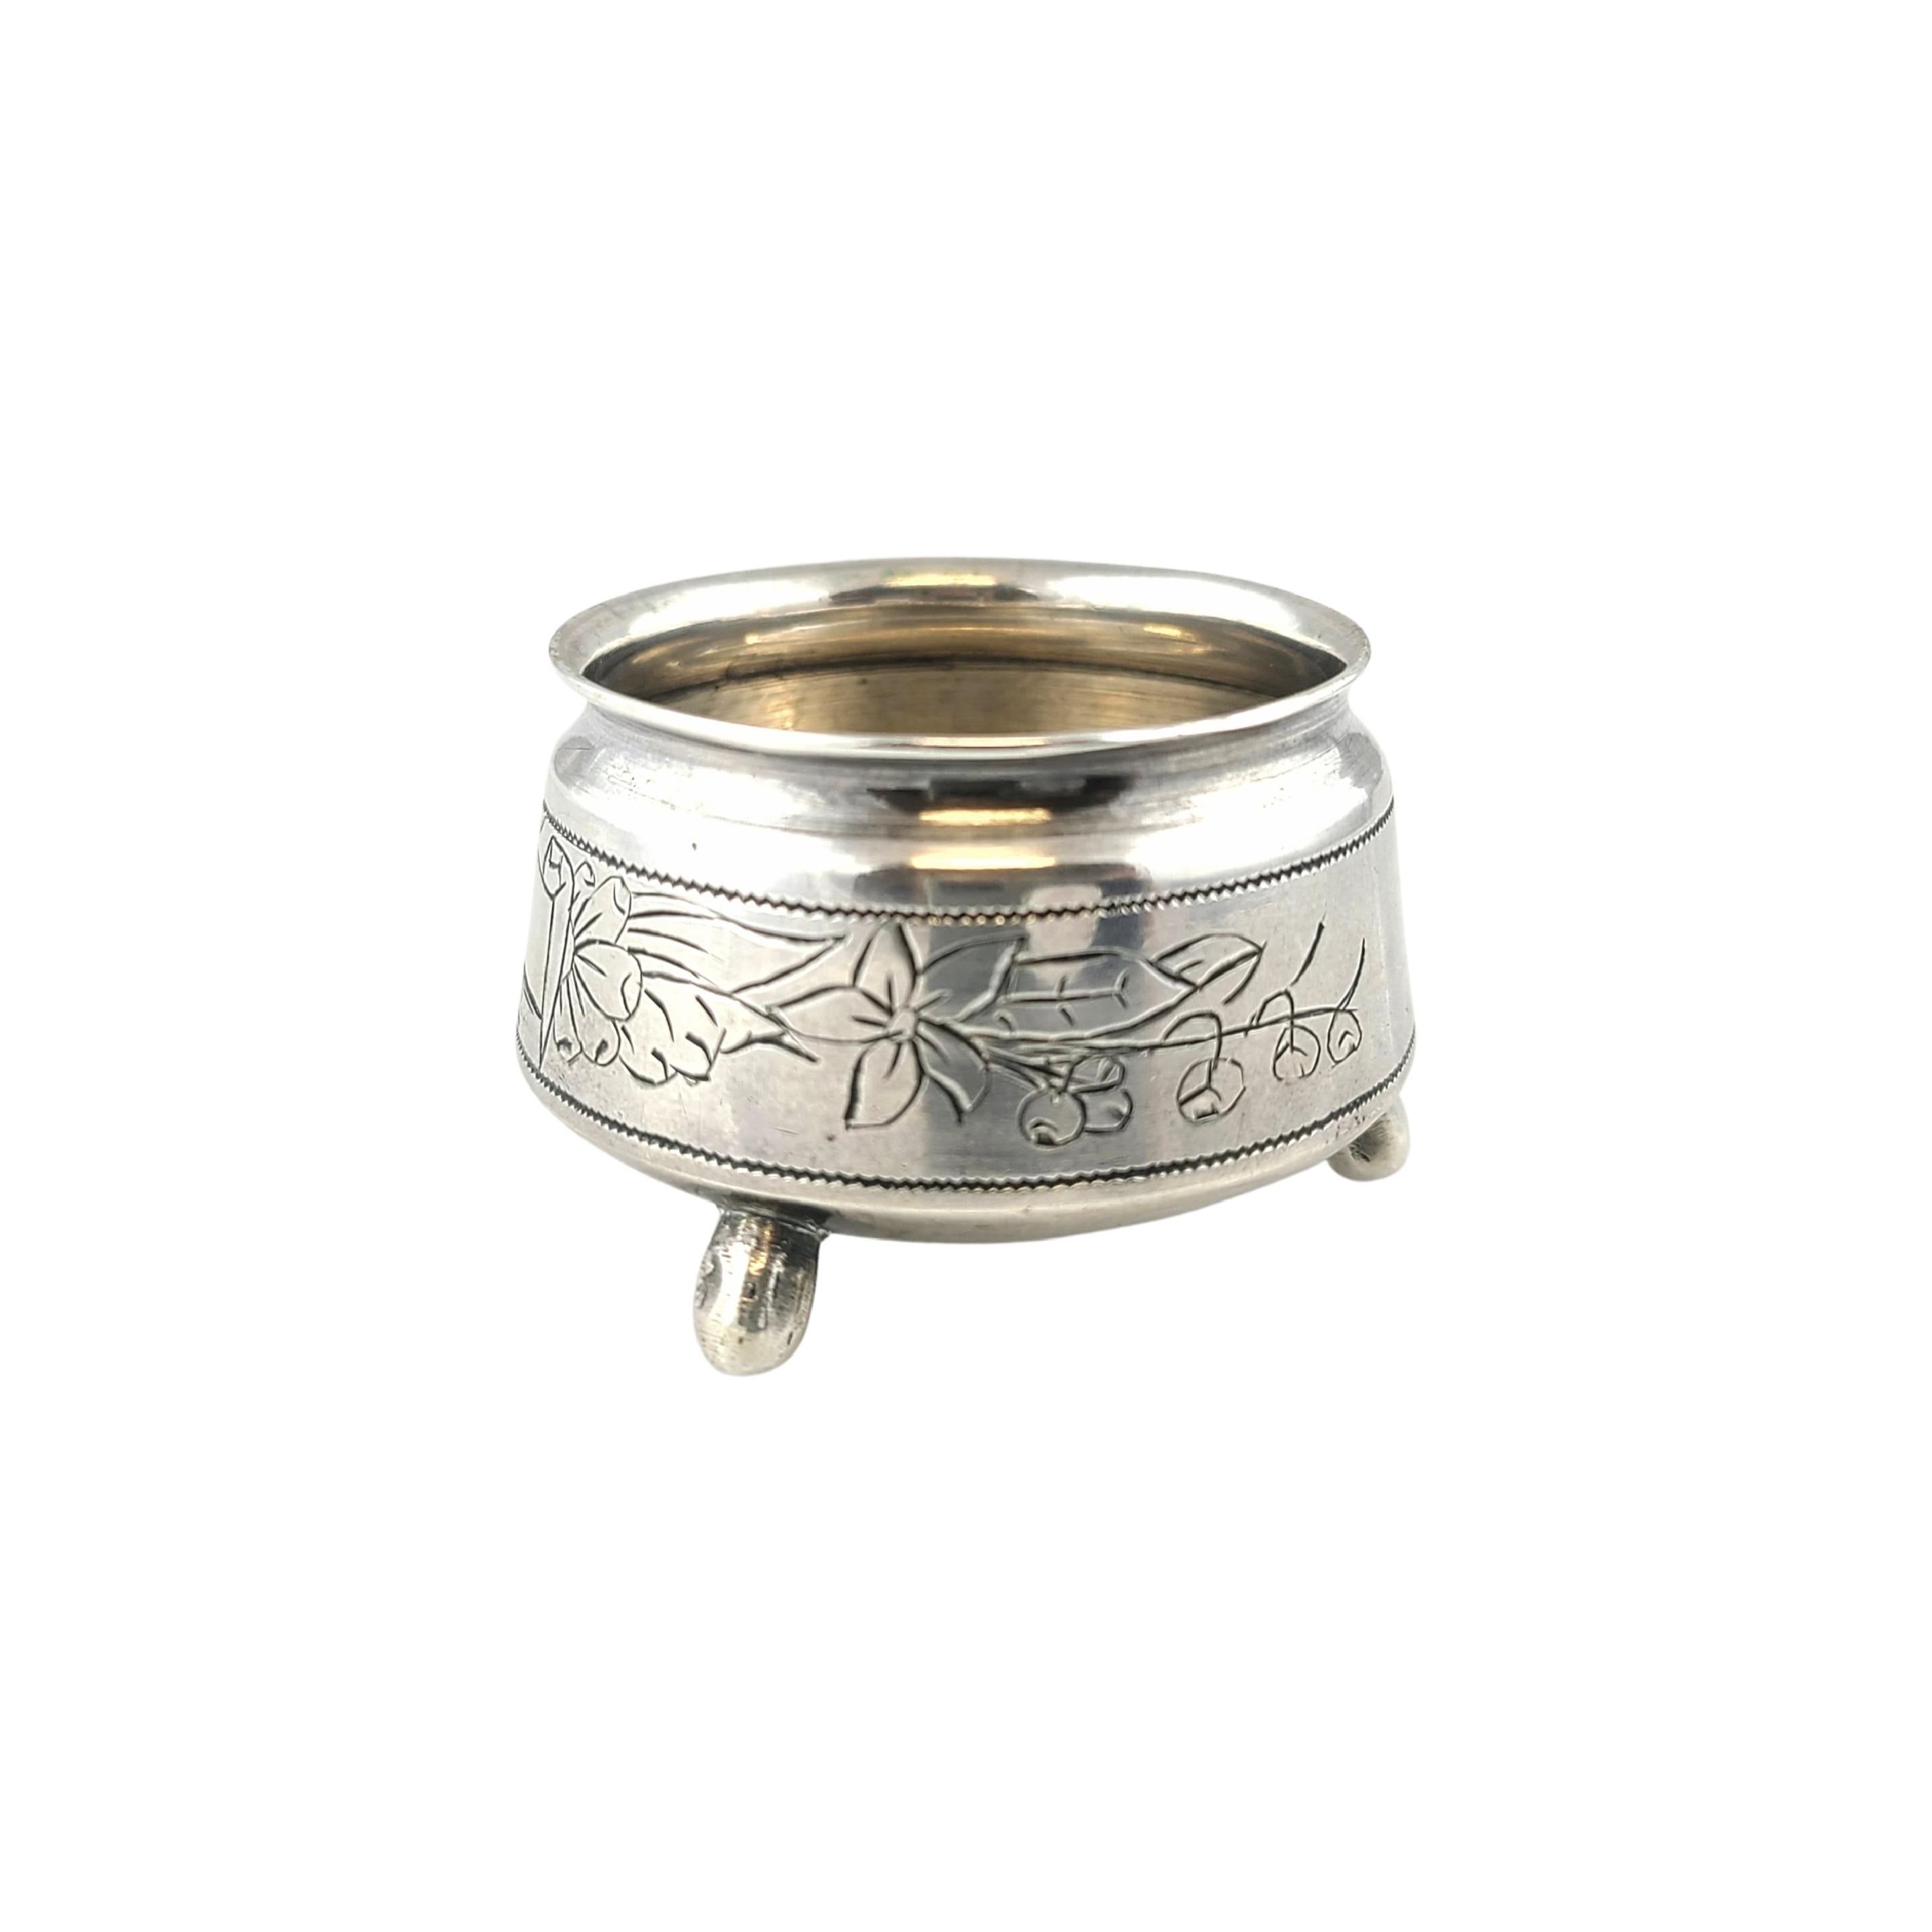 Russian silver salt cellar, .875 fineness.

This footed salt cellar features a beautiful bright cut etched blank ribbon and floral design.

Measures 1